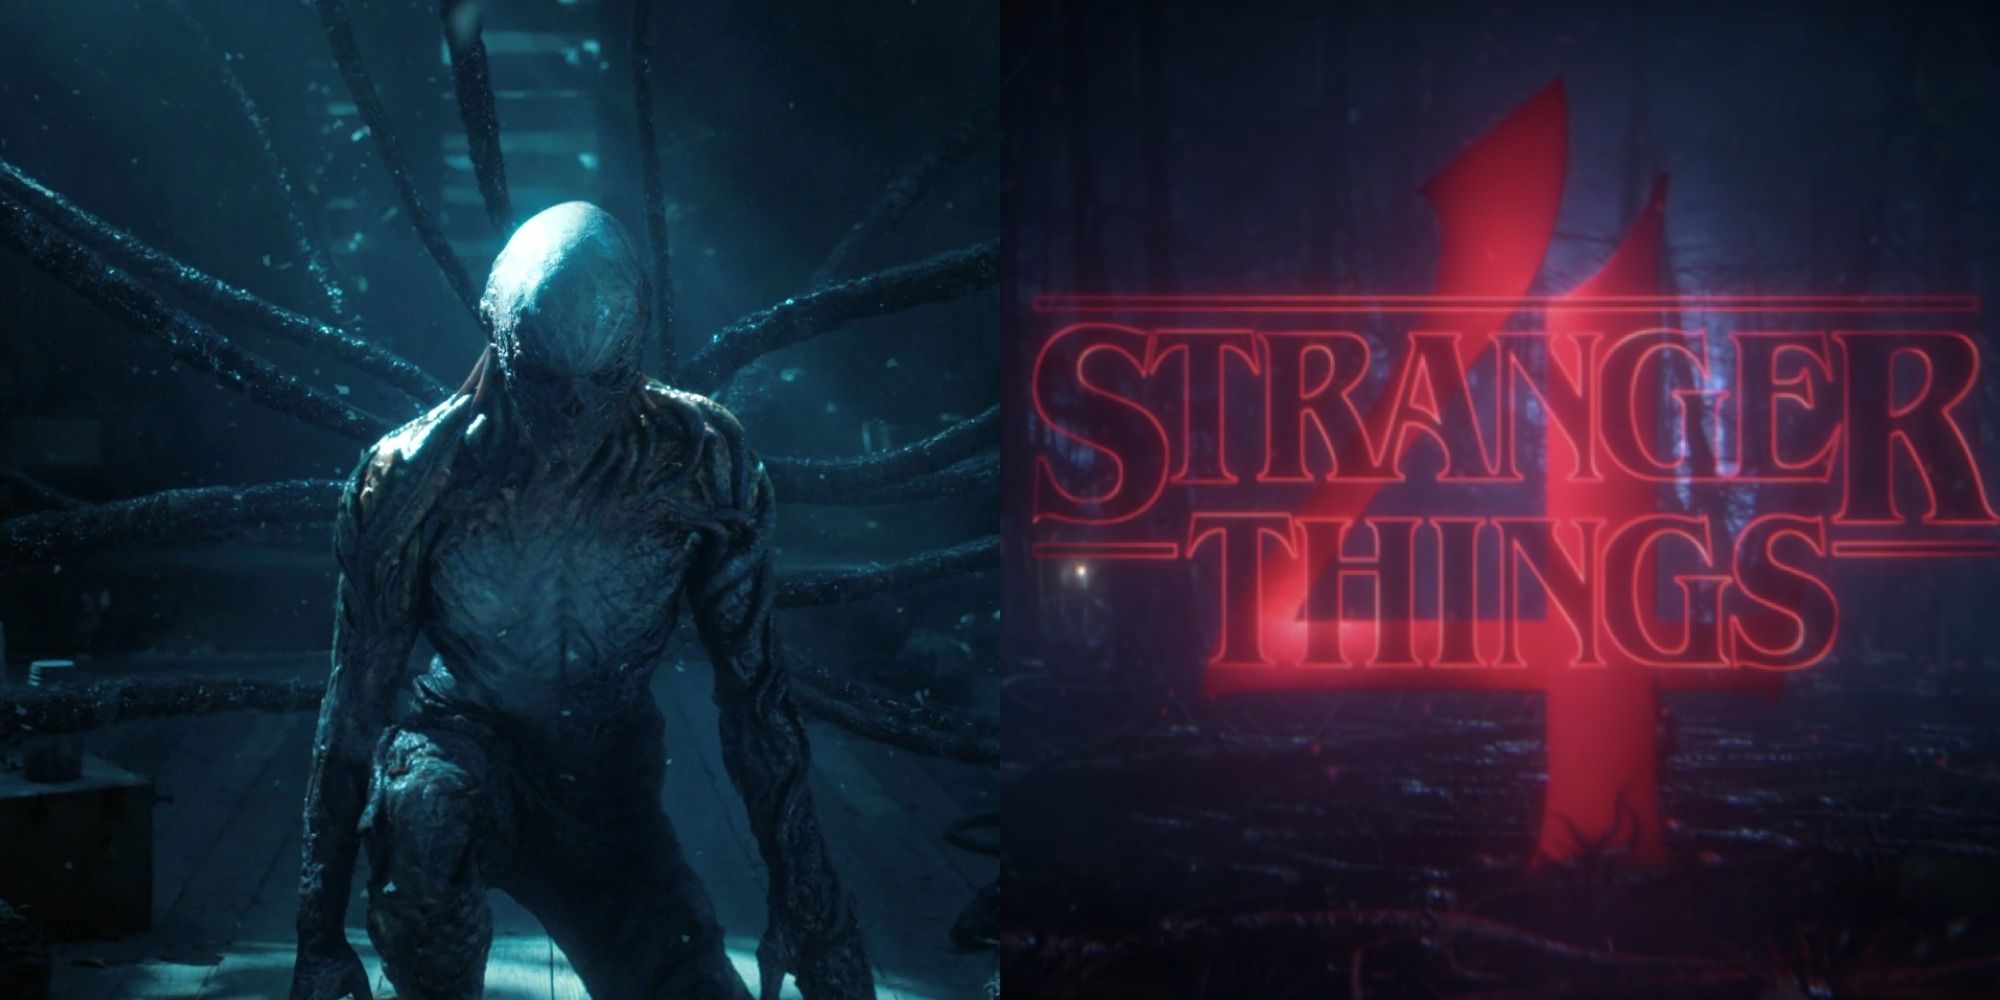 A split image of Vecna and the Stranger Things logo